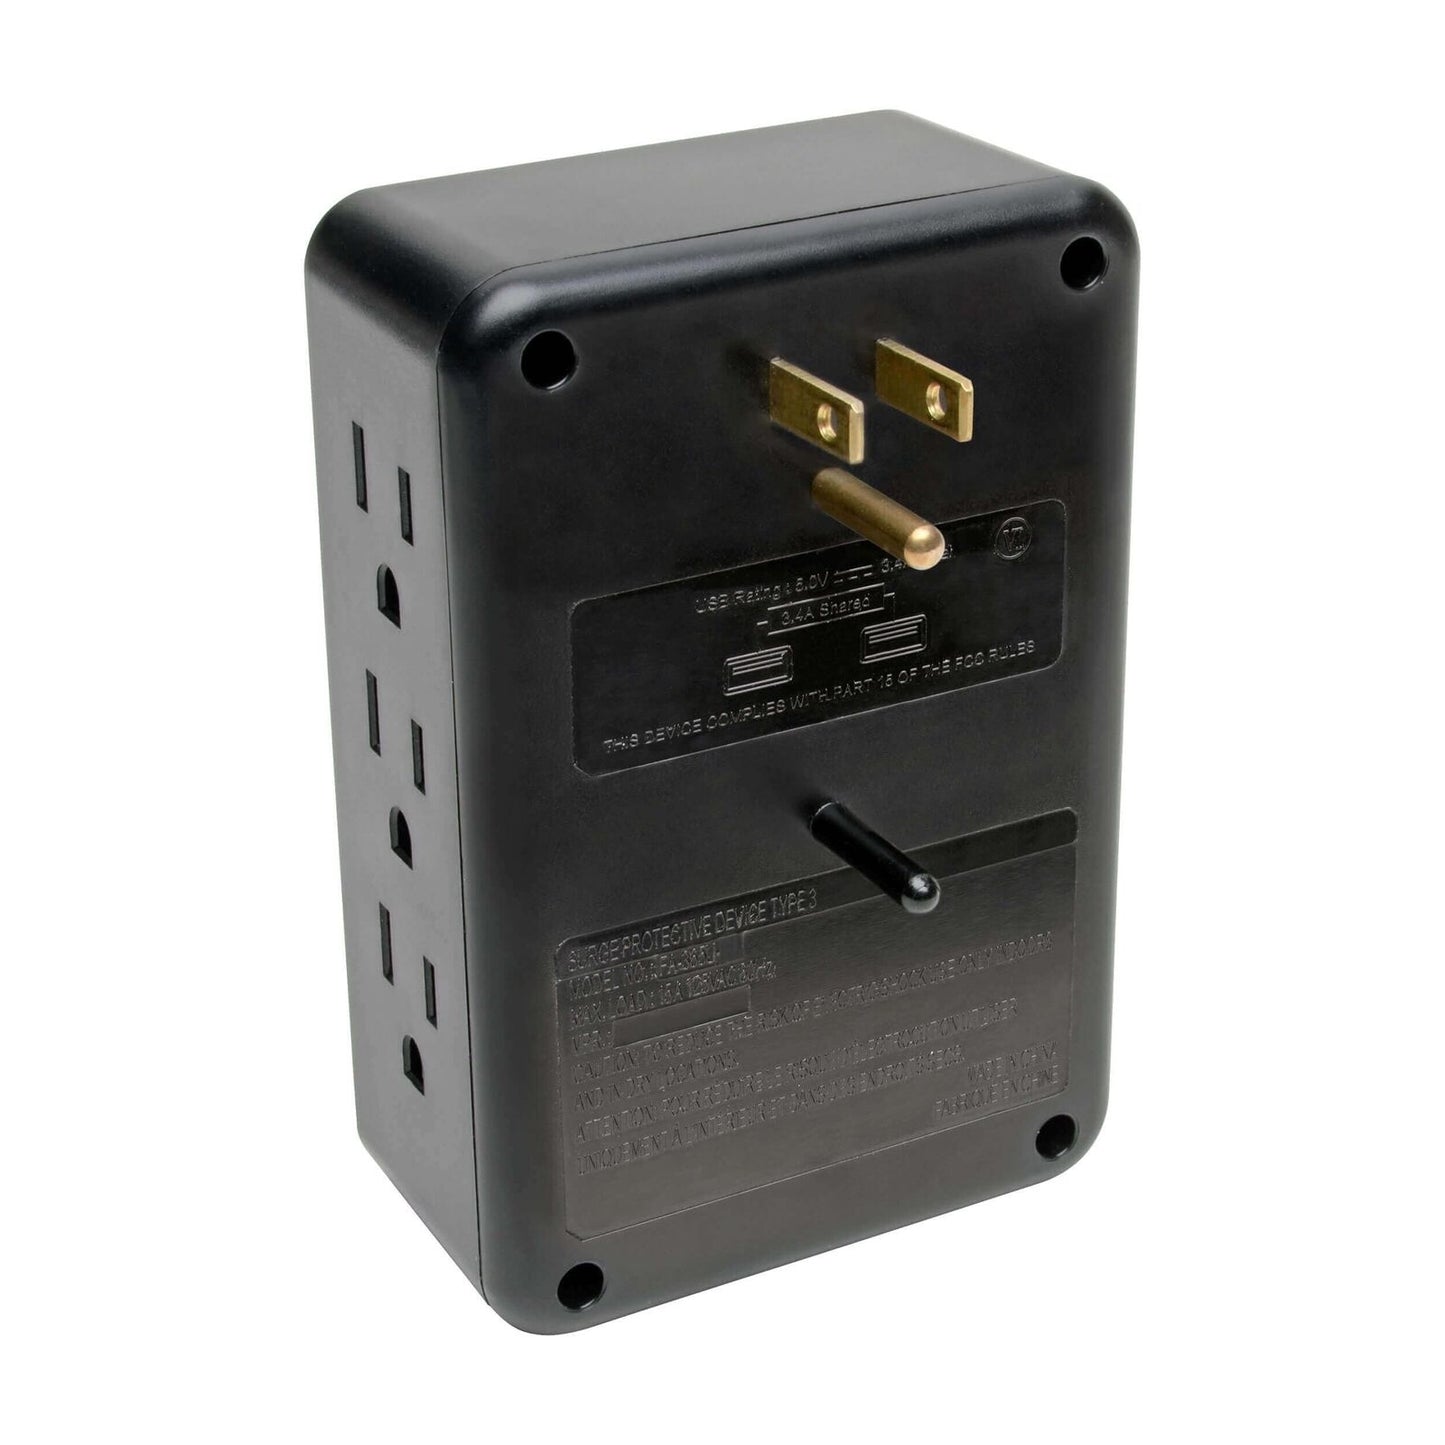 DIRECT 6OUT 2USB SURGE